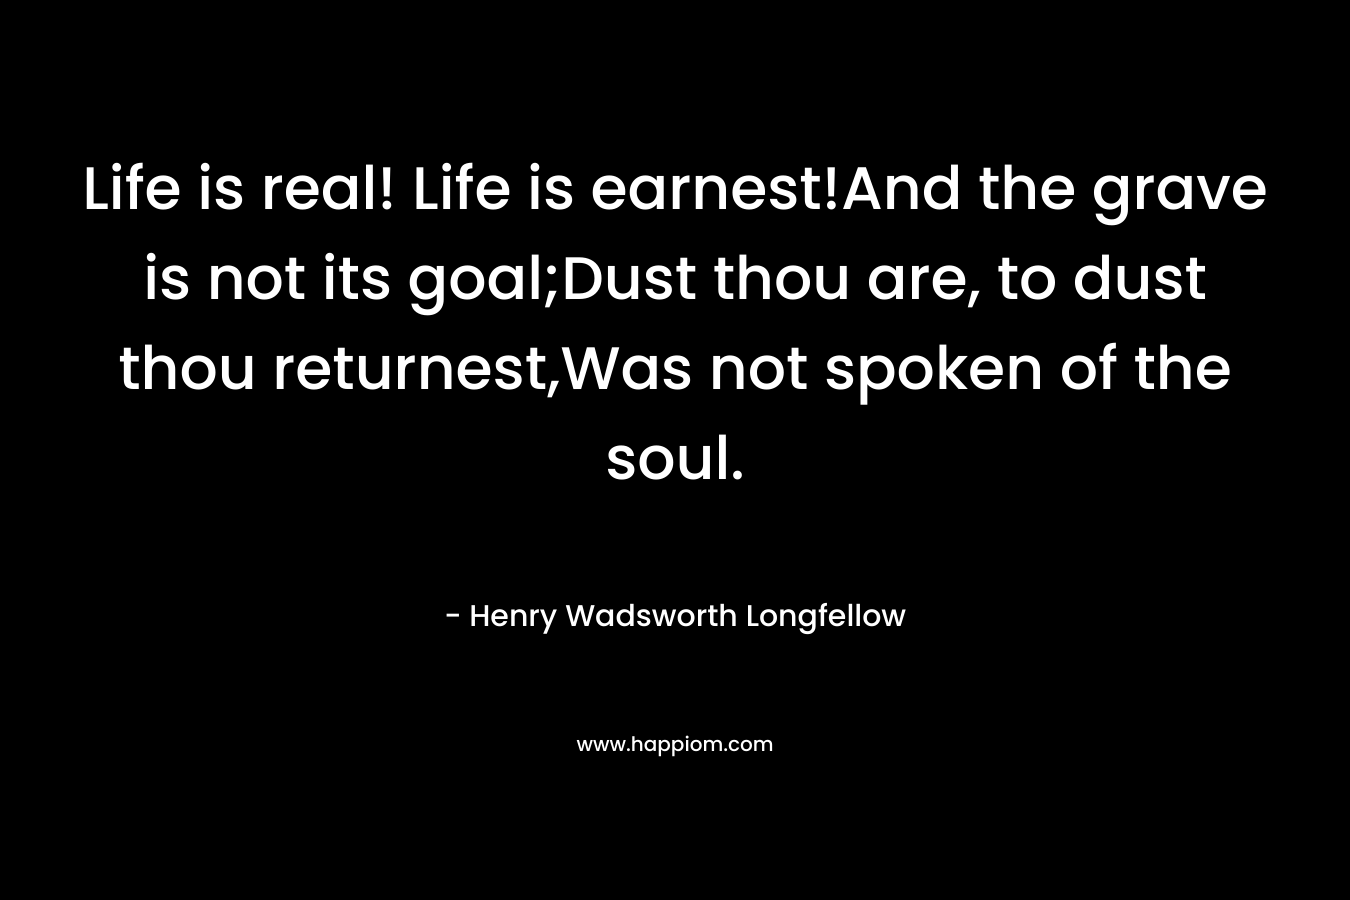 Life is real! Life is earnest!And the grave is not its goal;Dust thou are, to dust thou returnest,Was not spoken of the soul.